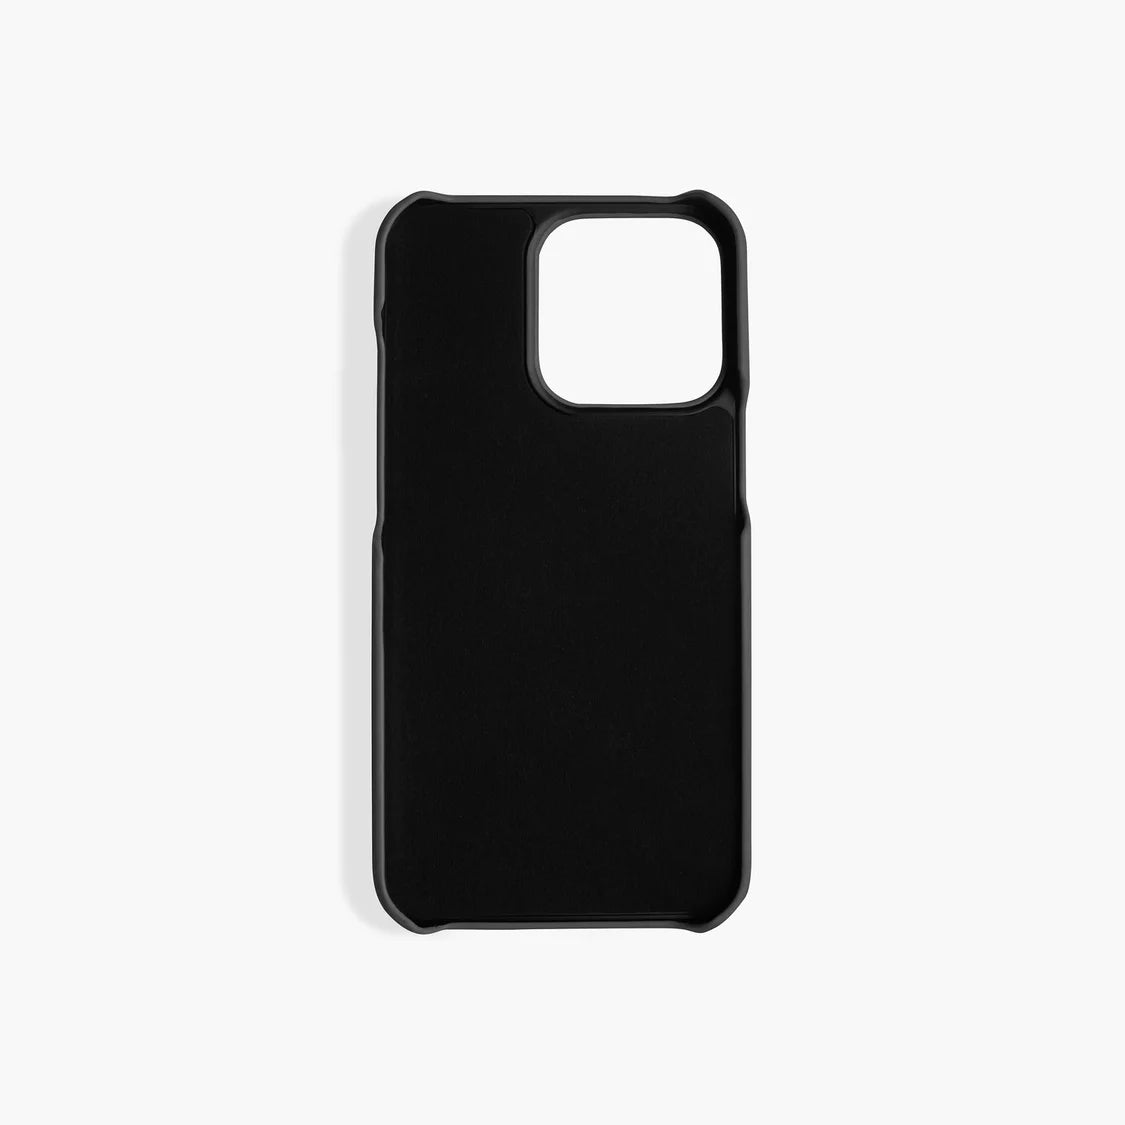 iPhone coque padded Black